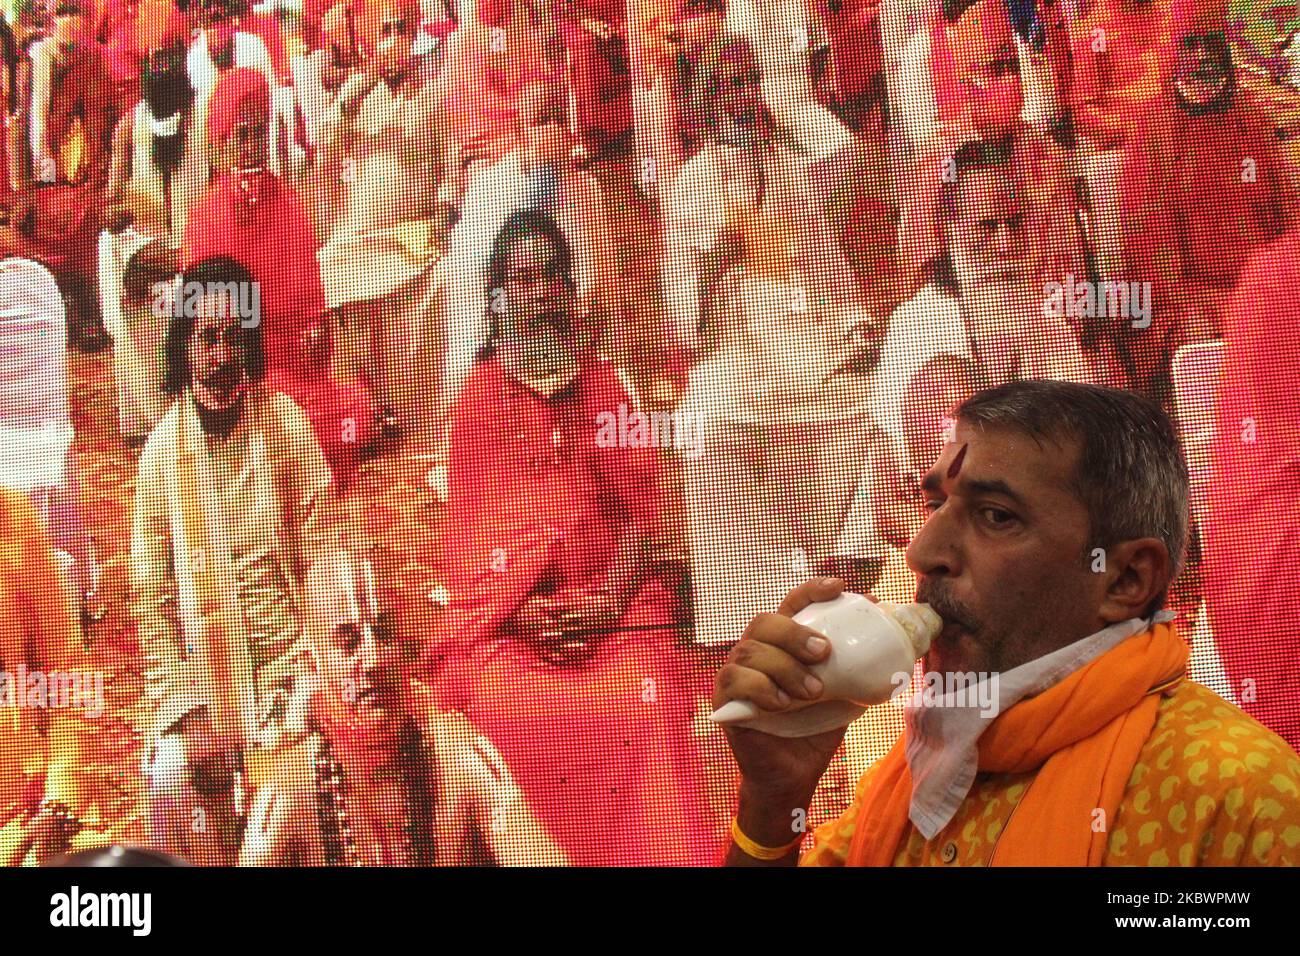 Temple priests celebrate by blowing a conch shell during a live telecast on a screen from Ayodhya of India's Prime Minister Narendra Modi participated in a ''Bhoomi Pujan'' or a groundbreaking ceremony to mark the building of a grand Ram temple, at Vivek Vihar in New Delhi on August 5, 2020. The Ayodhya dispute came to a conclusion last year with the ruling of Supreme Court when it asked the Union government to handover the site for the construction of Ram temple. The court also ordered to give an alternate five acres of land in another place to the Sunni Waqf Board for the purpose of building Stock Photo